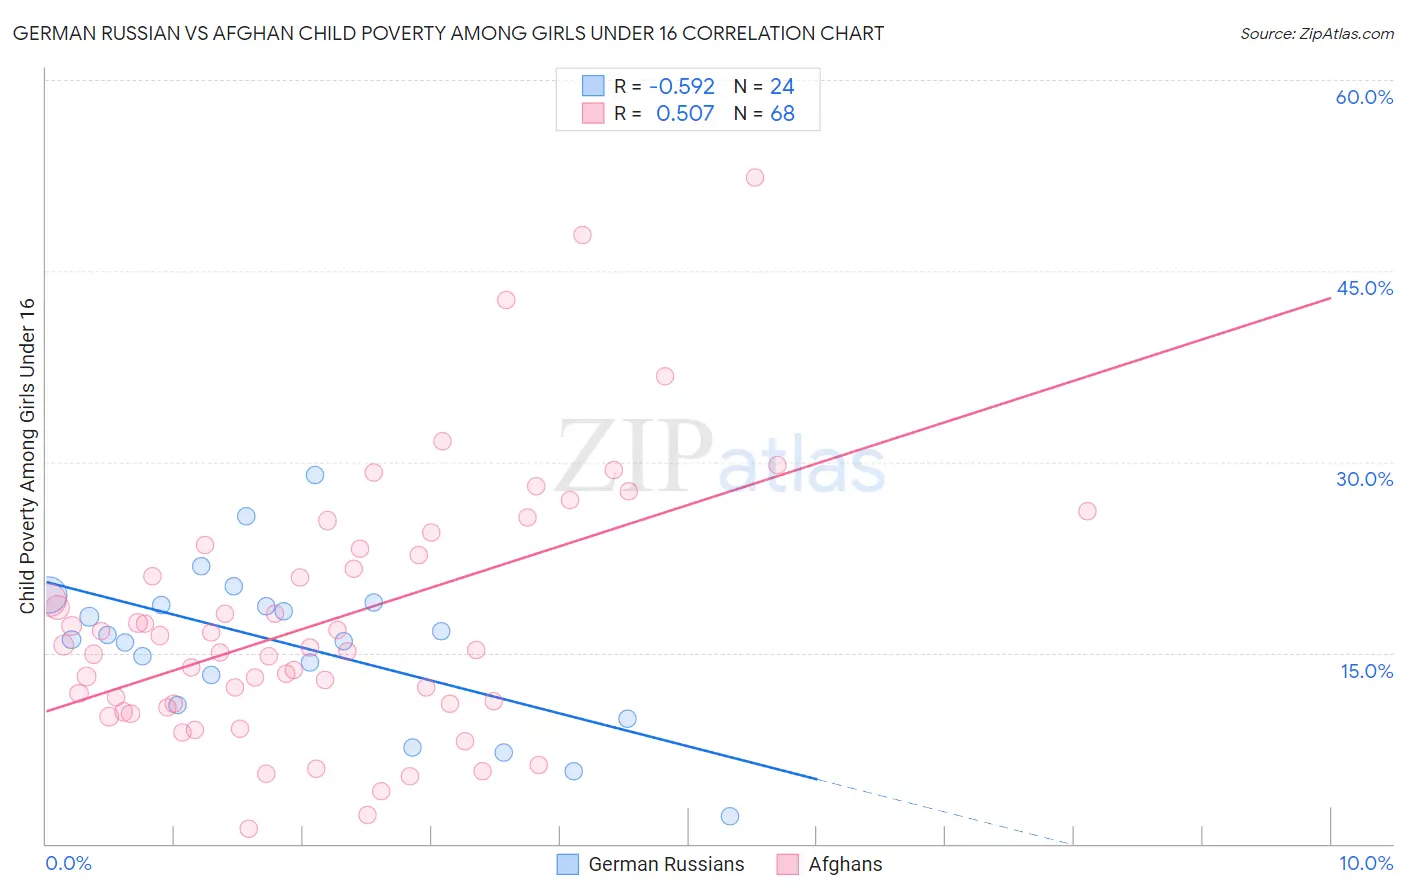 German Russian vs Afghan Child Poverty Among Girls Under 16